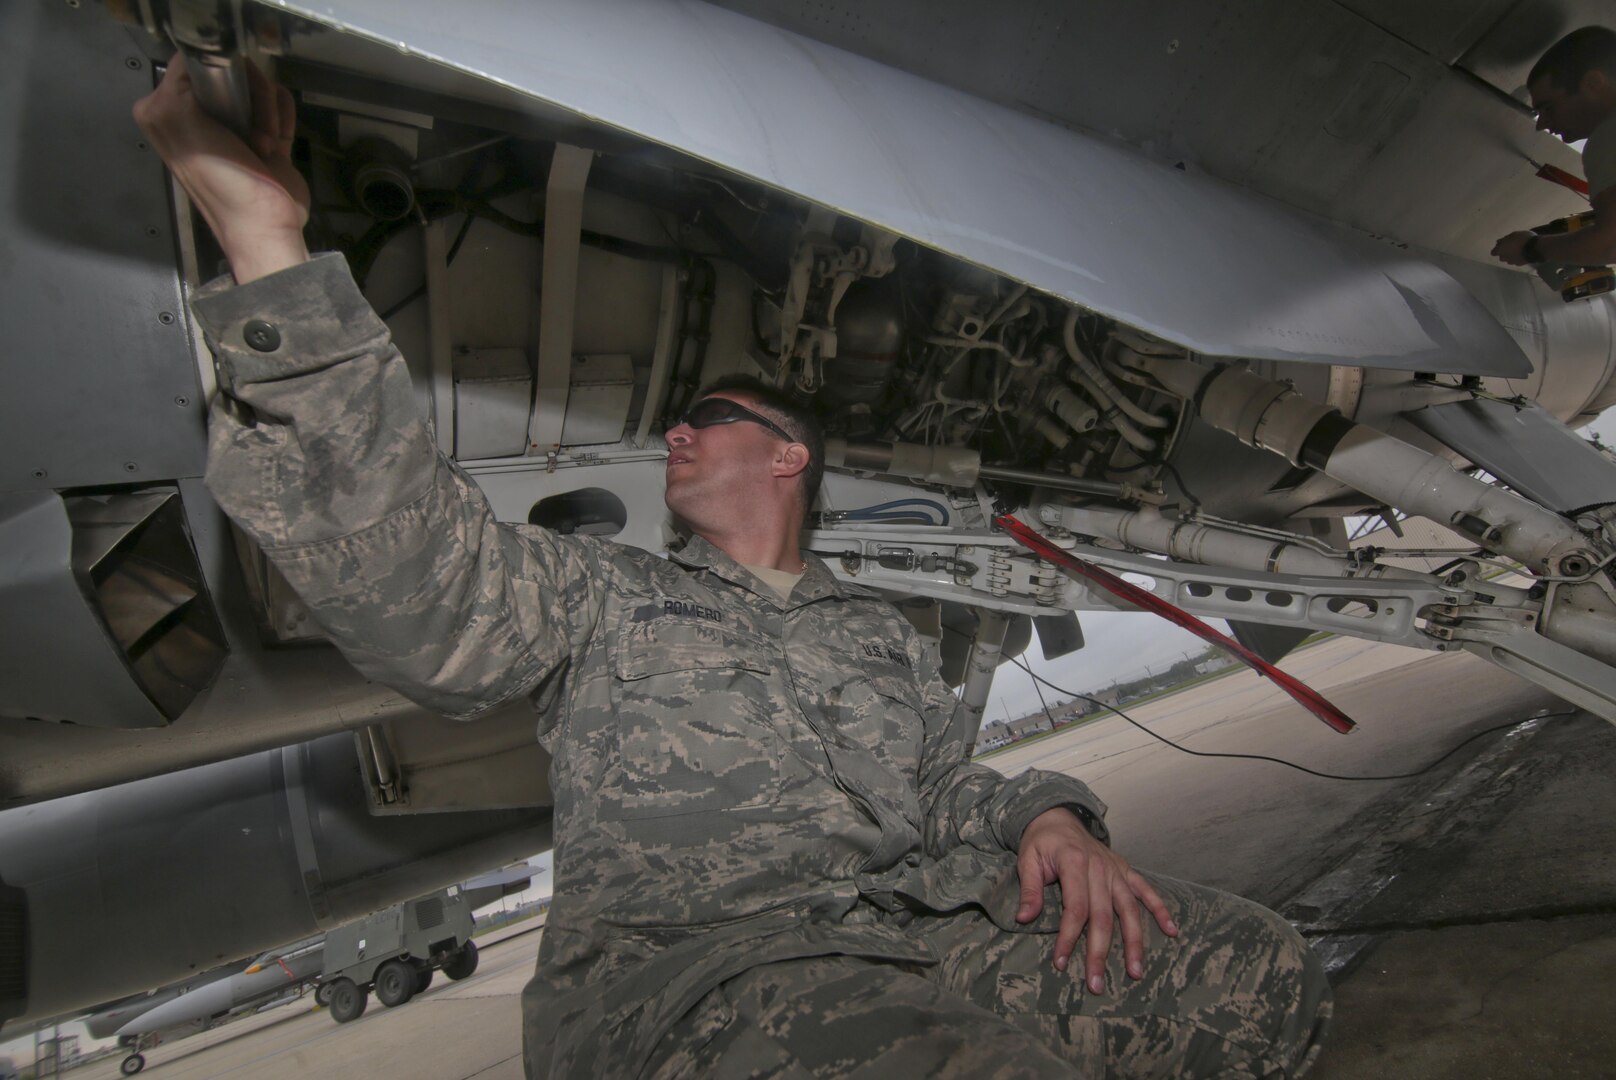 New Jersey Air National Guard Tech. Sgt. Sean Romero from the 177th Aircraft Maintenance Squadron looks over an F-16D Fighting Falcon during a three-day Aeropsace Control Alert CrossTell live-fly training exercise at Atlantic City Air National Guard Base, N.J., May 23, 2017. Representatives from Air National Guard fighter wings, Civil Air Patrol, and U.S. Coast Guard rotary-wing air intercept units will conduct daily sorties from May 23-25 to hone their skills with tactical-level air-intercept procedures. (U.S. Air National Guard photo by Master Sgt. Matt Hecht/Released)